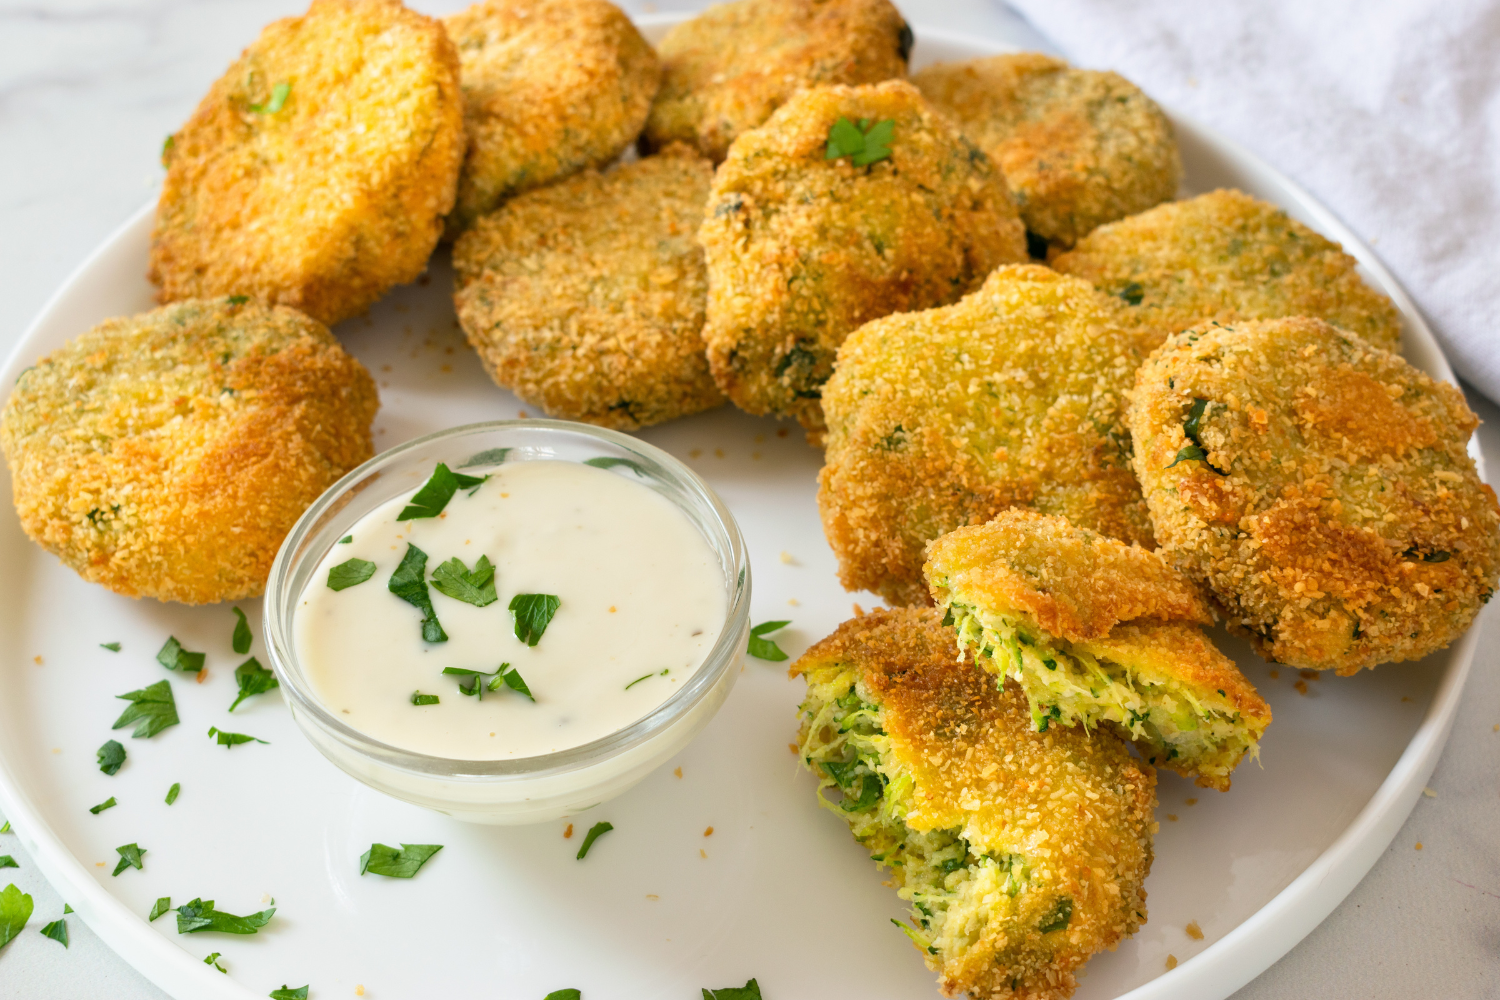 Zucchini Fritters with Feta, Cheddar, Mint and Parsley article